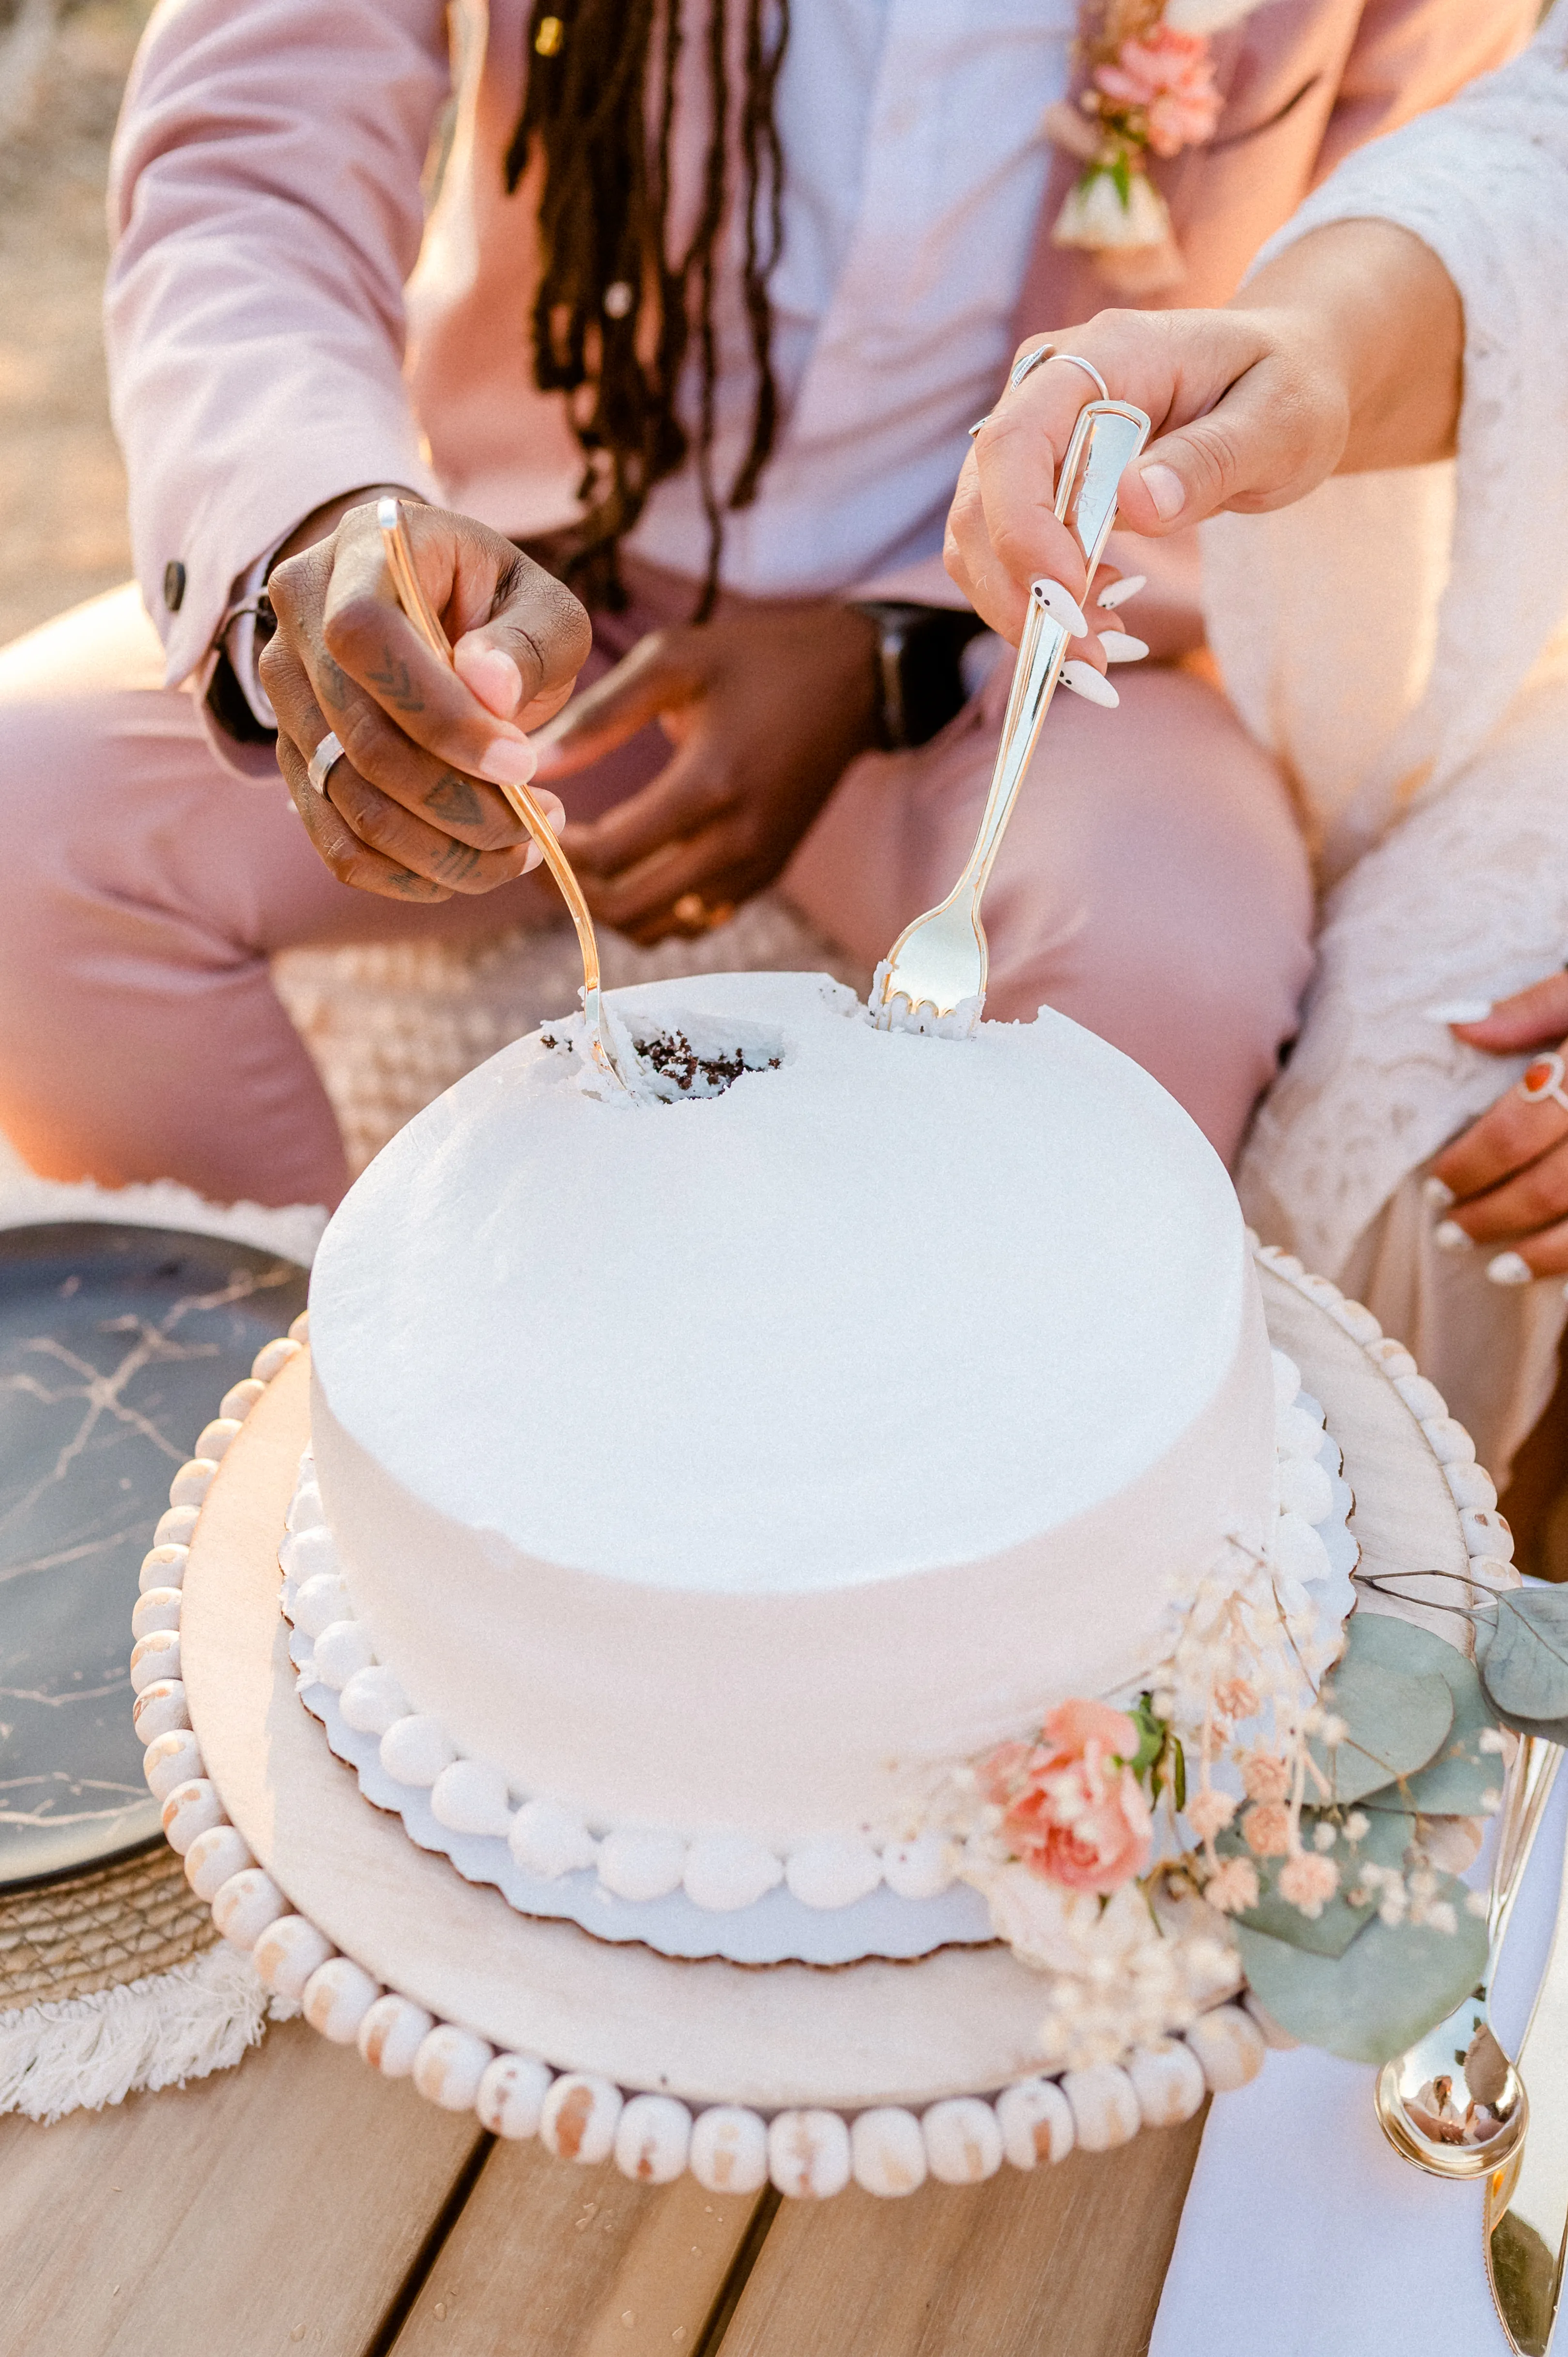 taking a bite from the wedding cake with a fork